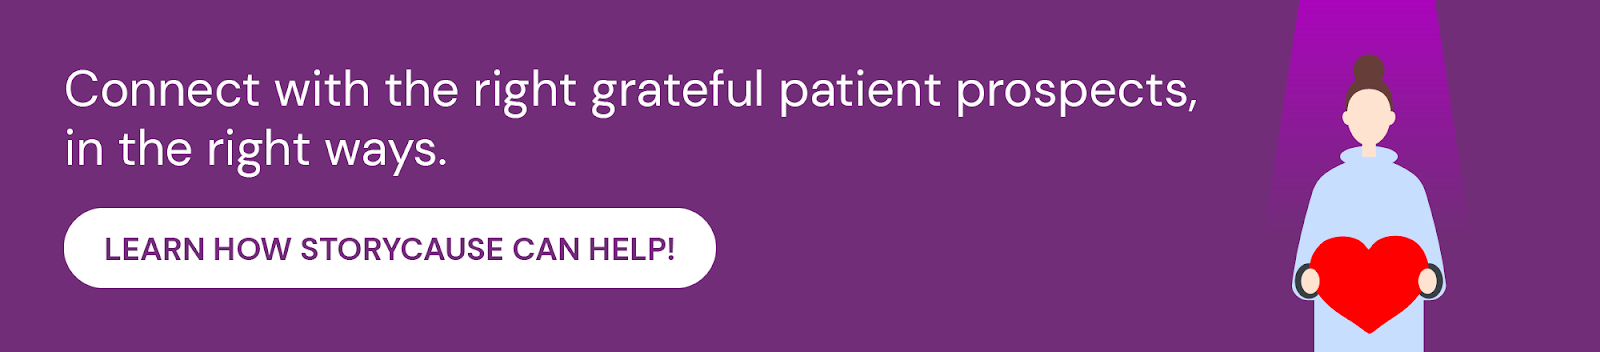 Click through to learn how StoryCause can help you maximize your grateful patient fundraising results.